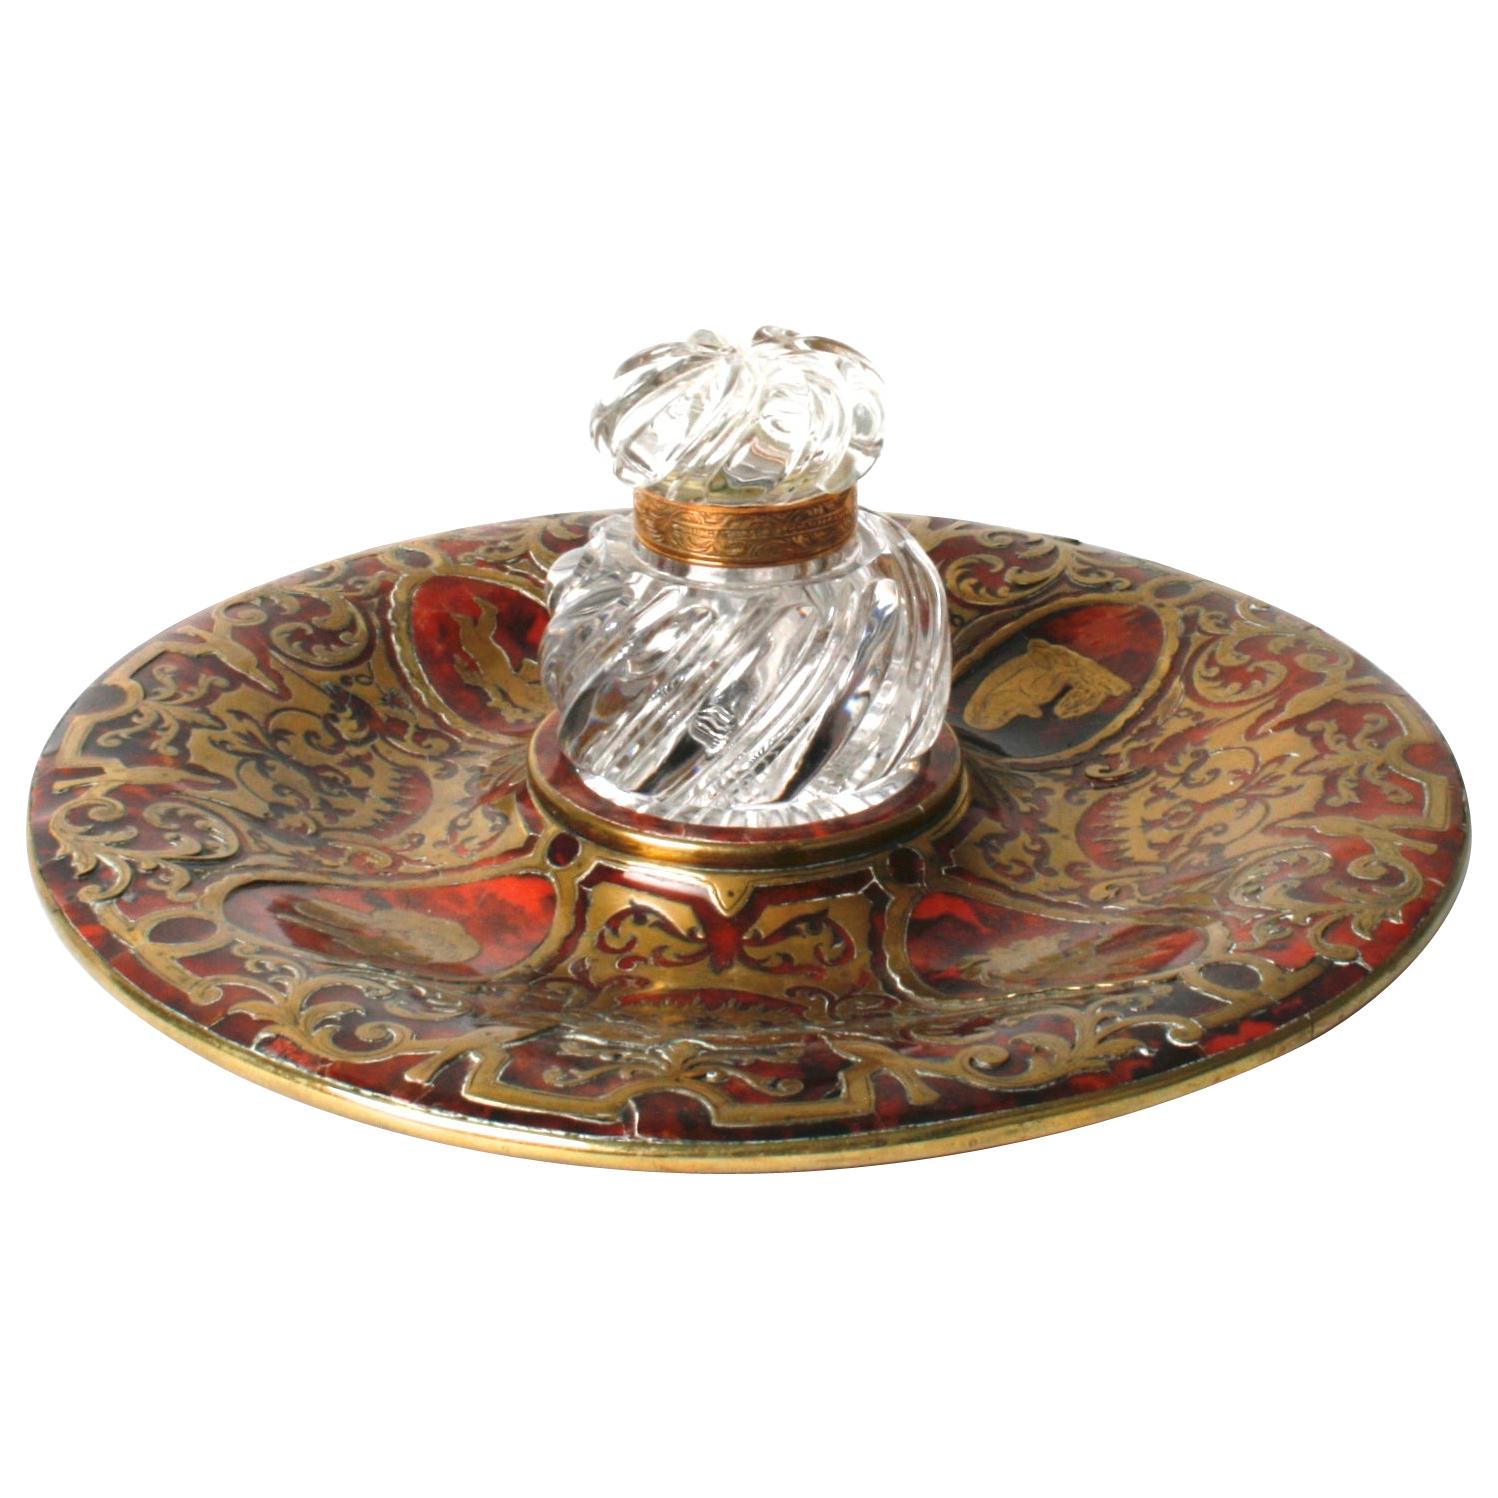 Leuchars & Sons Brass Inlaid Boulle Inkstand with Spiral Crystal Inkwell